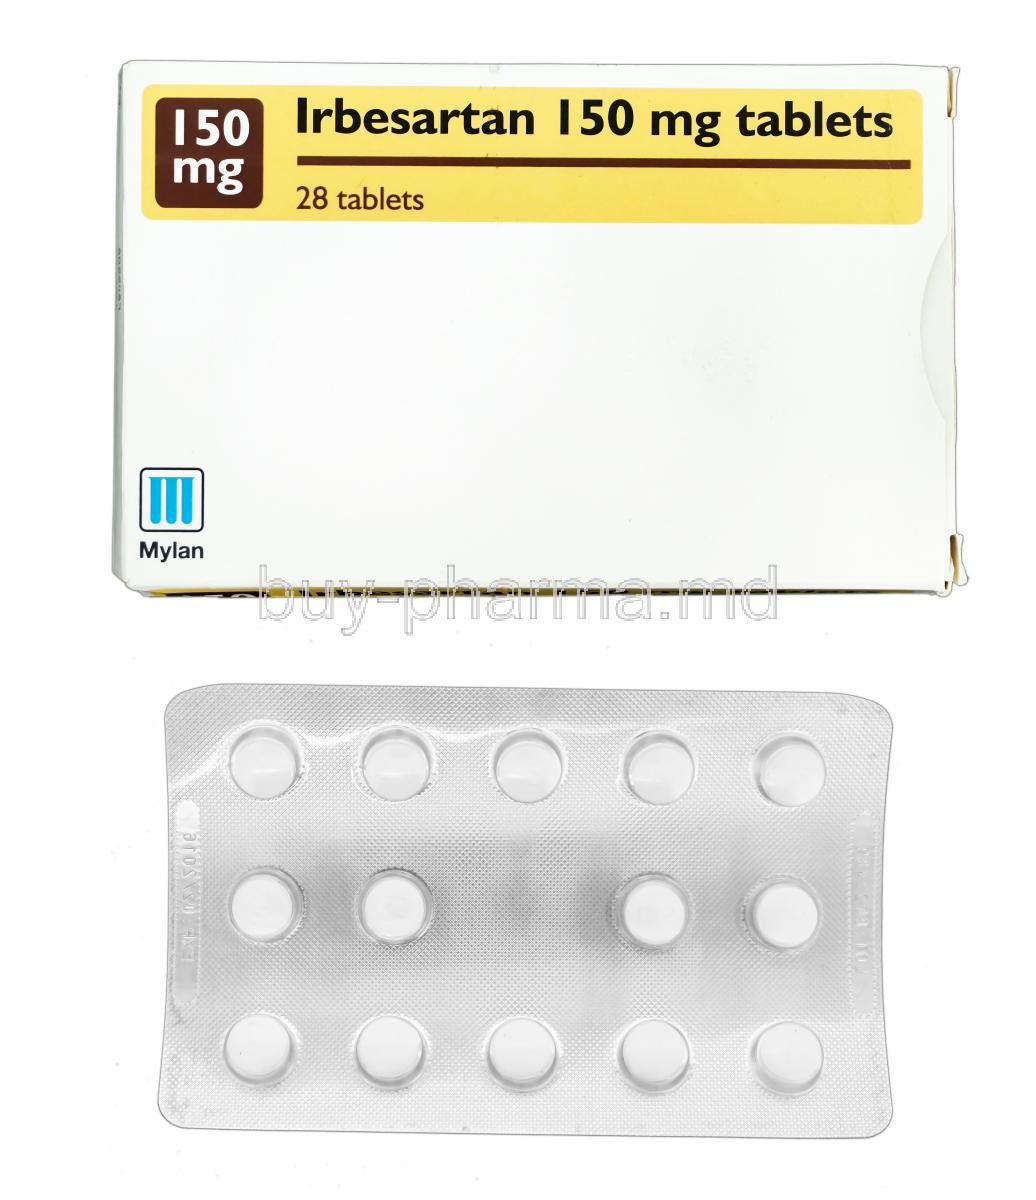 why does irbesartan cause weight gain